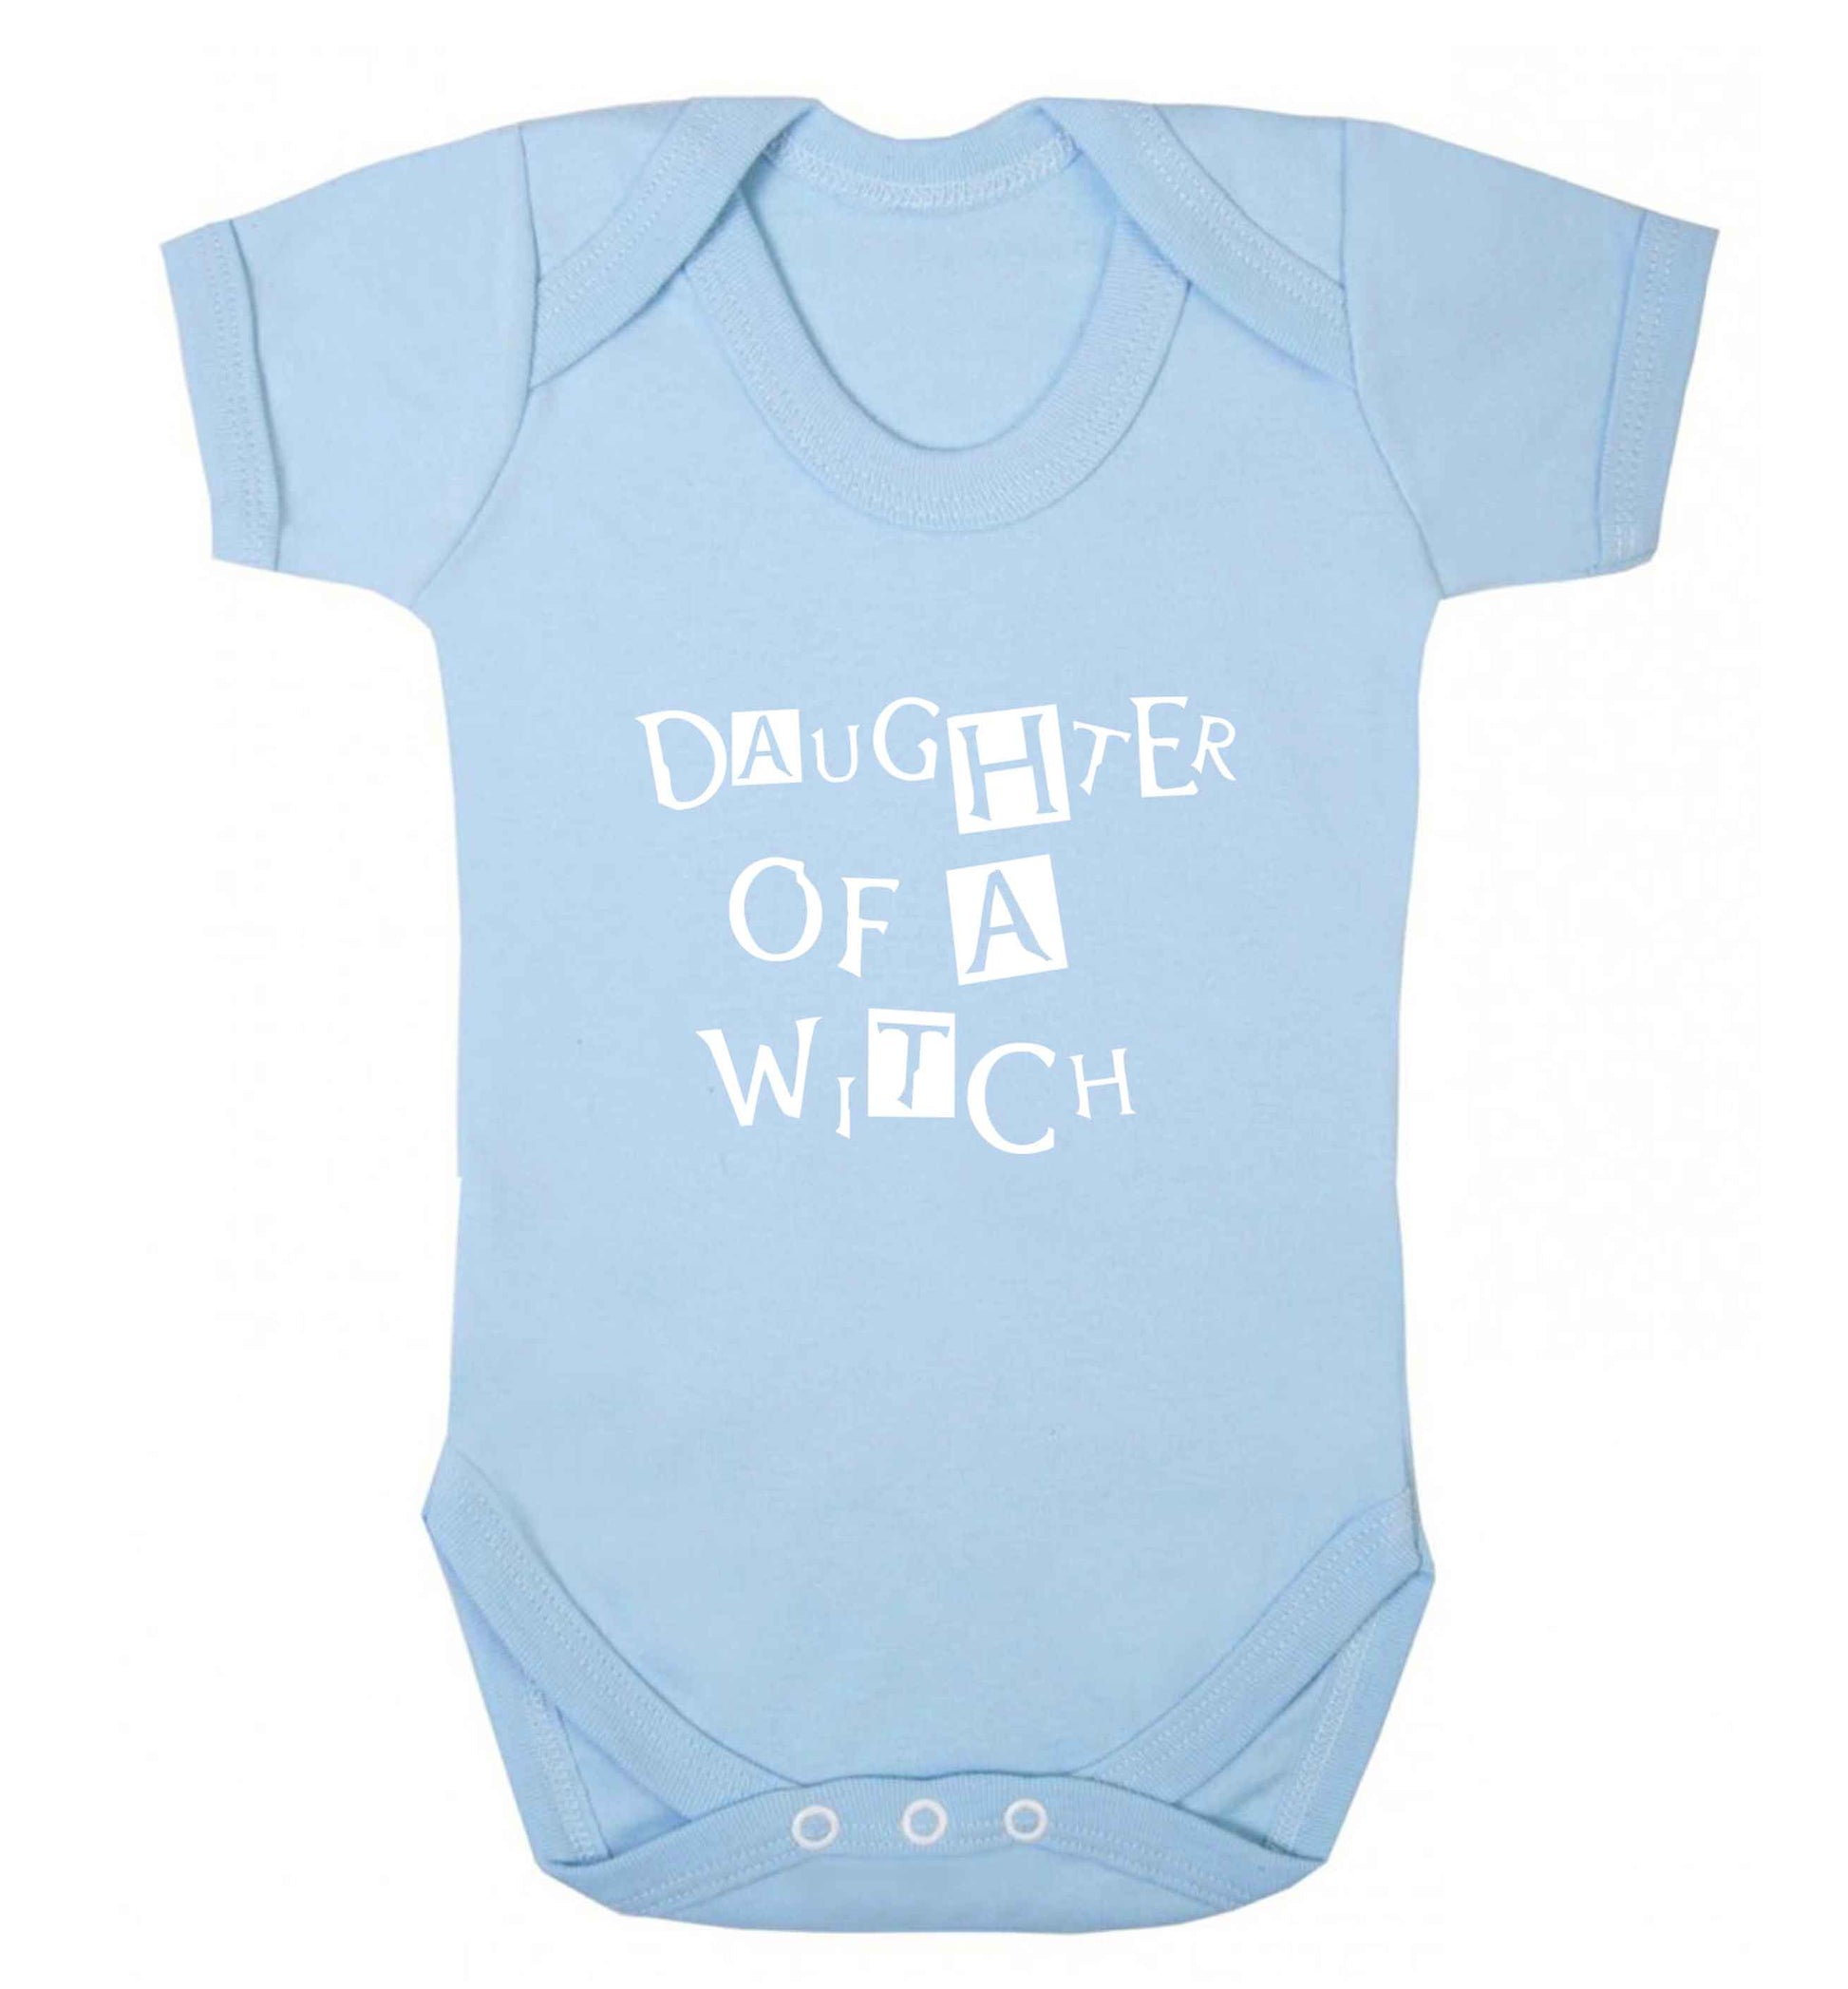 Daughter of a witch baby vest pale blue 18-24 months